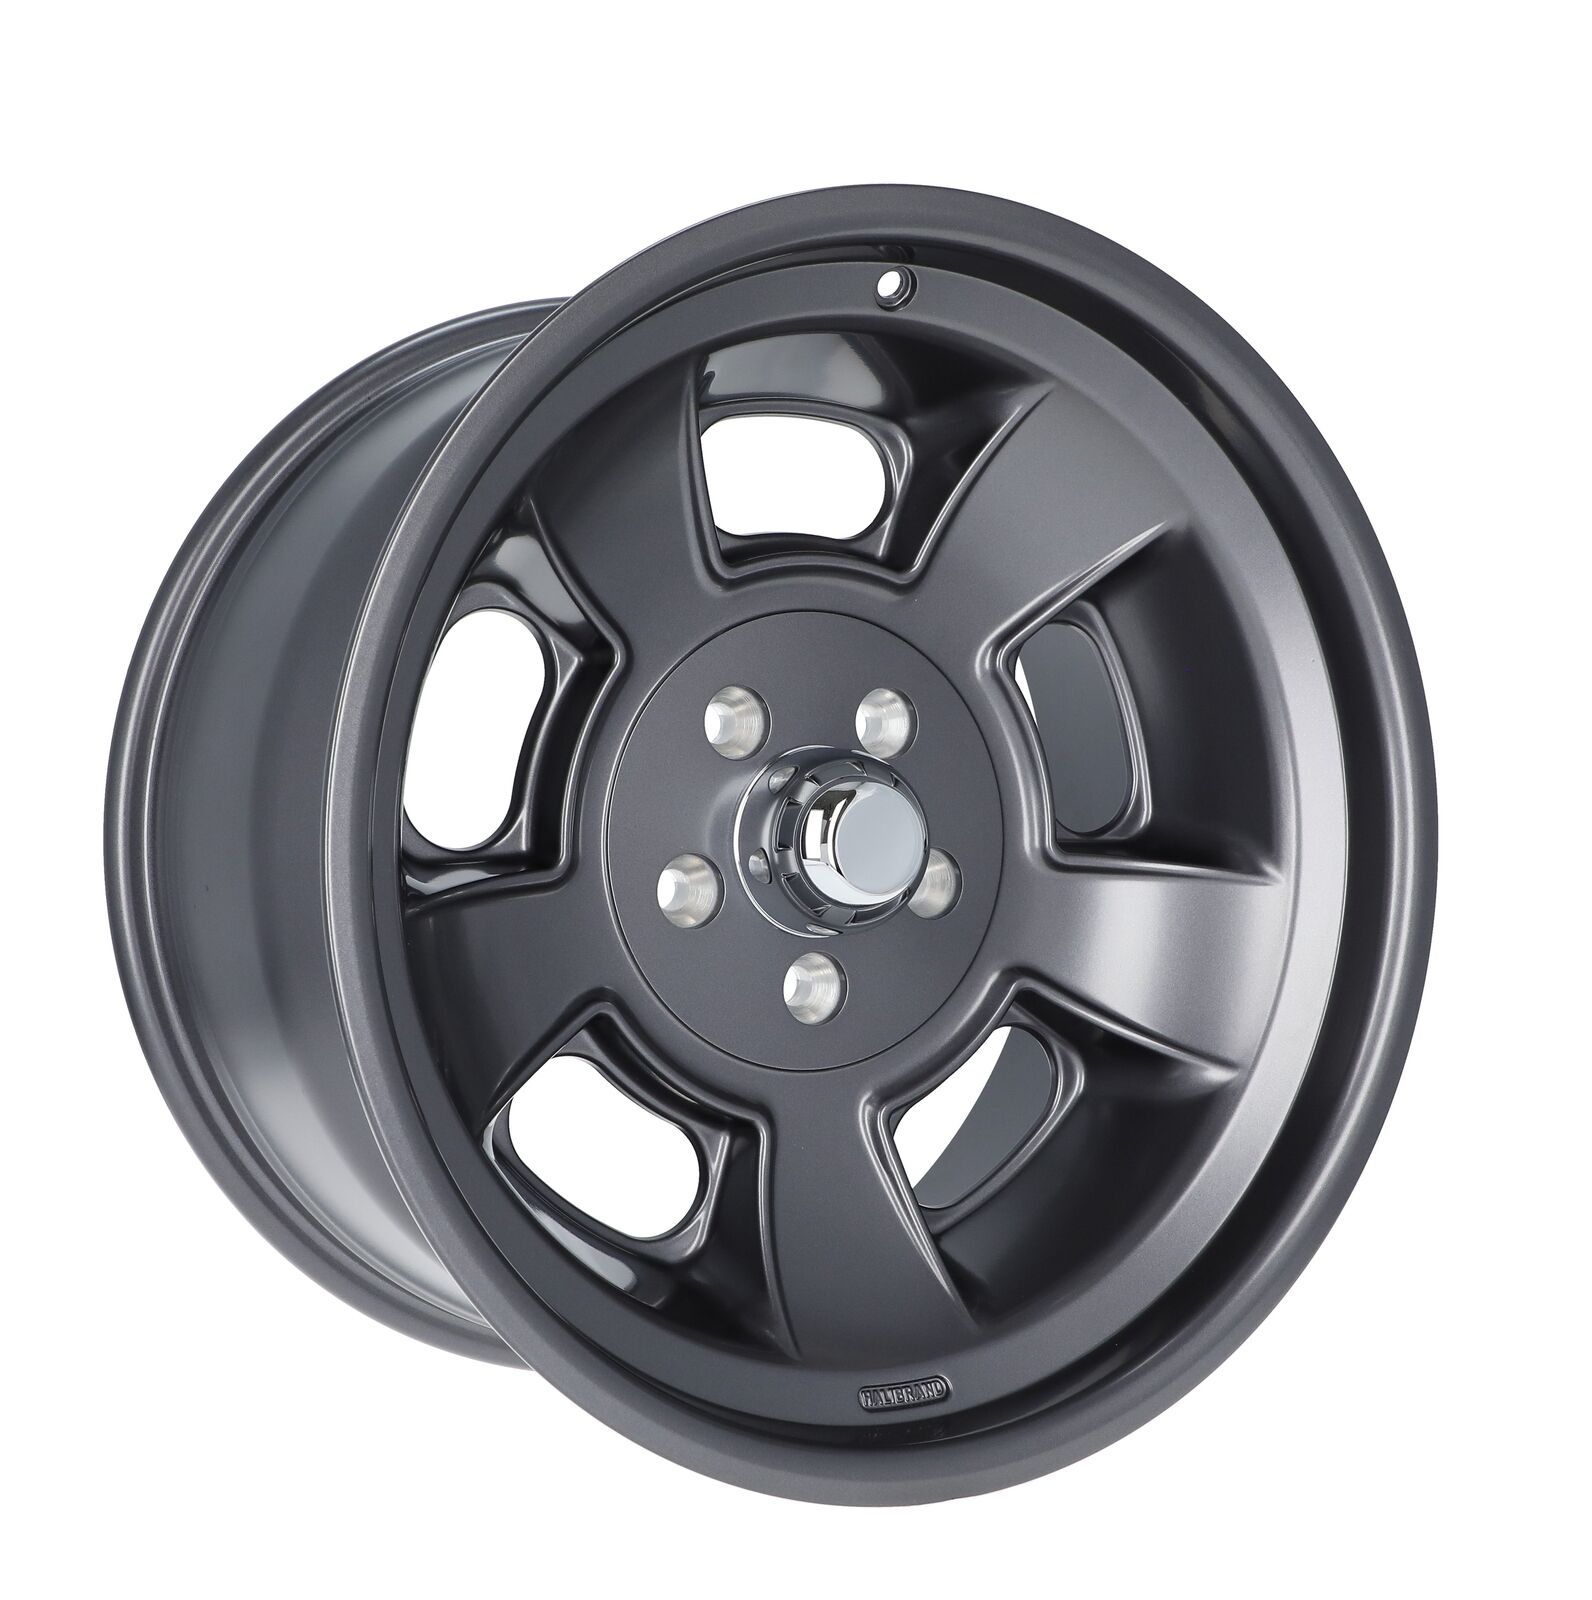 Halibrand Sprint Flow Formed Wheel 19x10 - 5.5 bs Anthracite Semi Gloss - Each